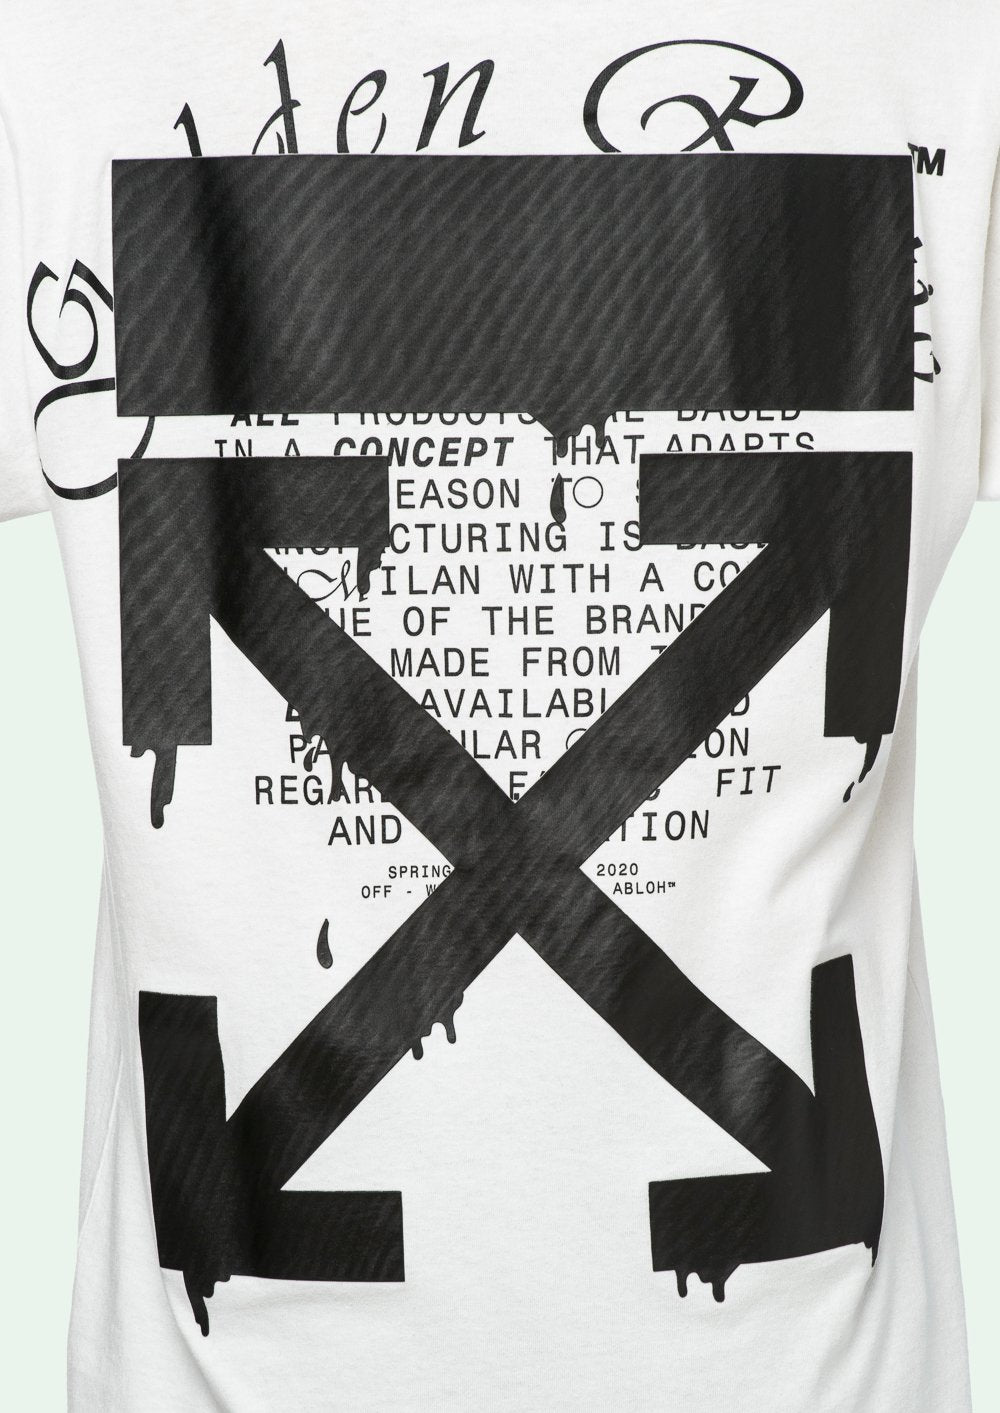 OFF WHITE DRIPPING ARROWS S/S OVER T-SHIRT